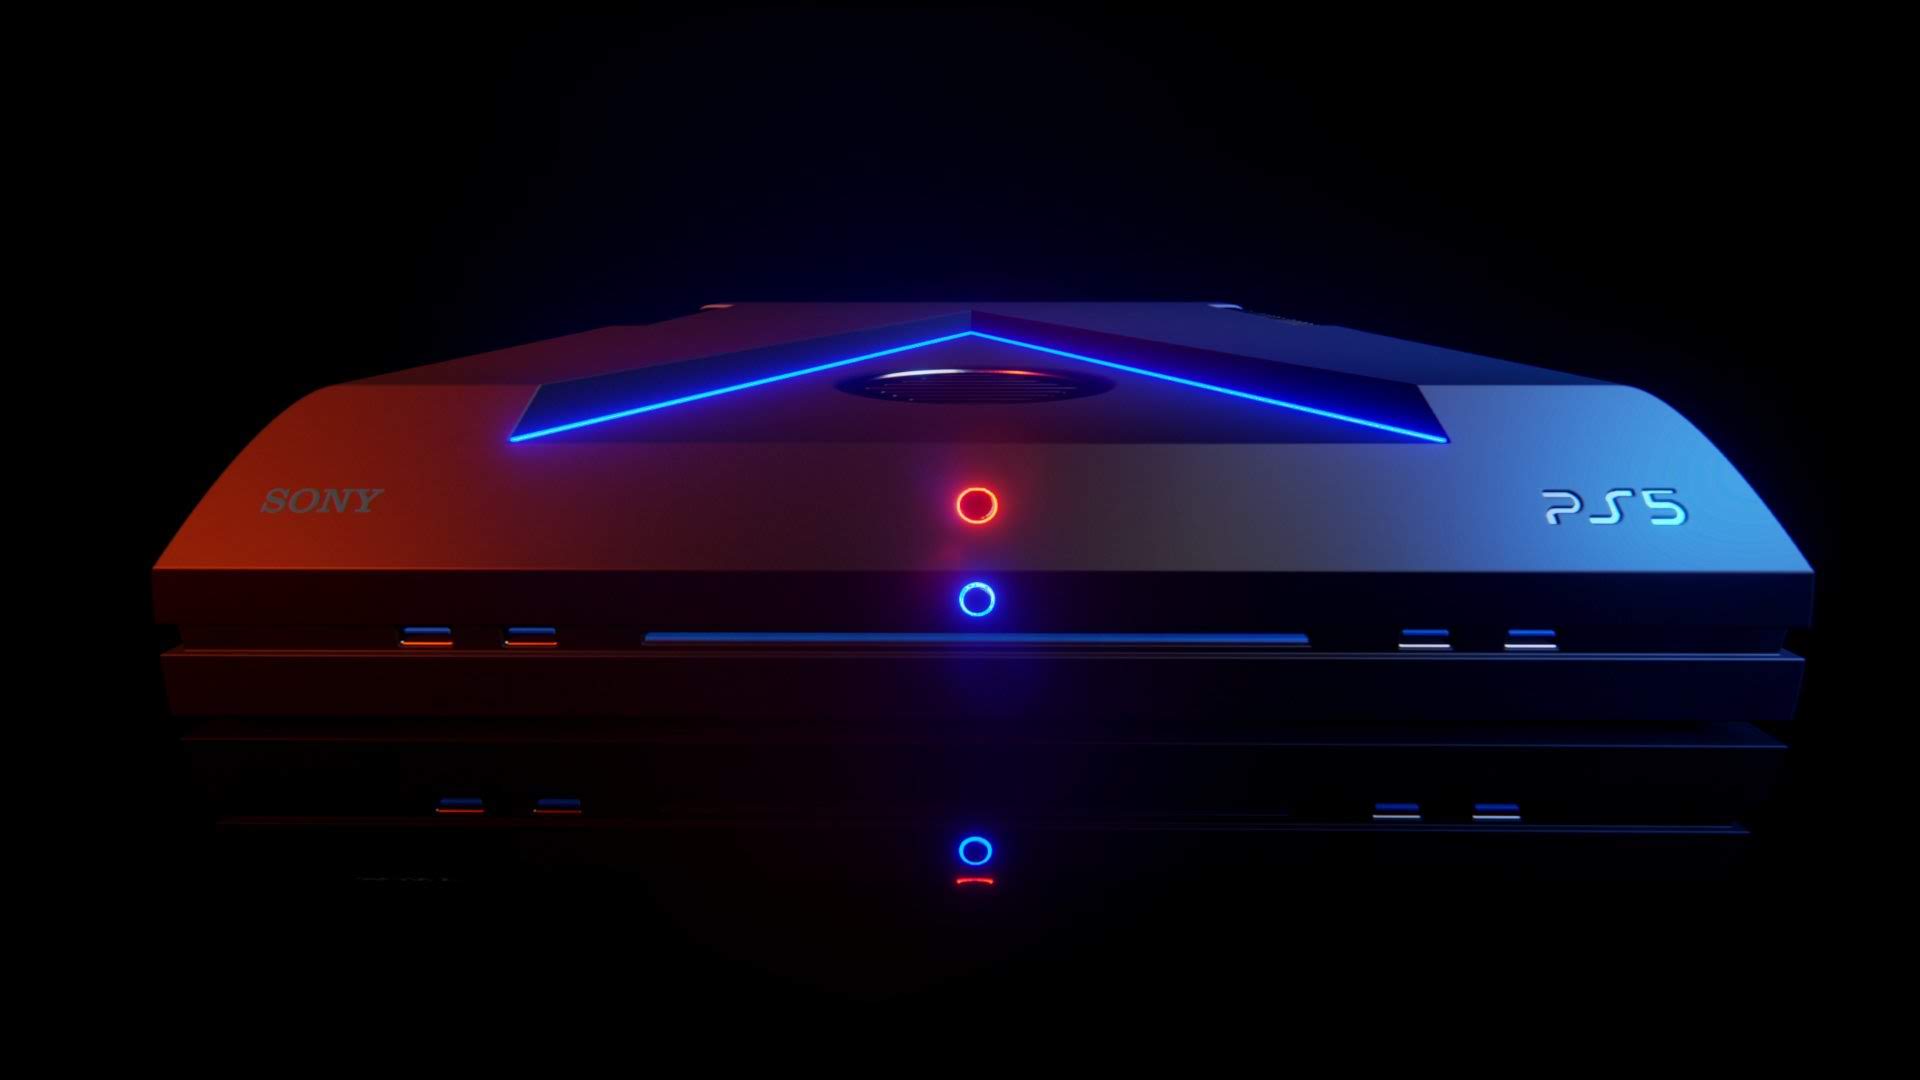 This PS5 concept design based on leaked dev kit image looks